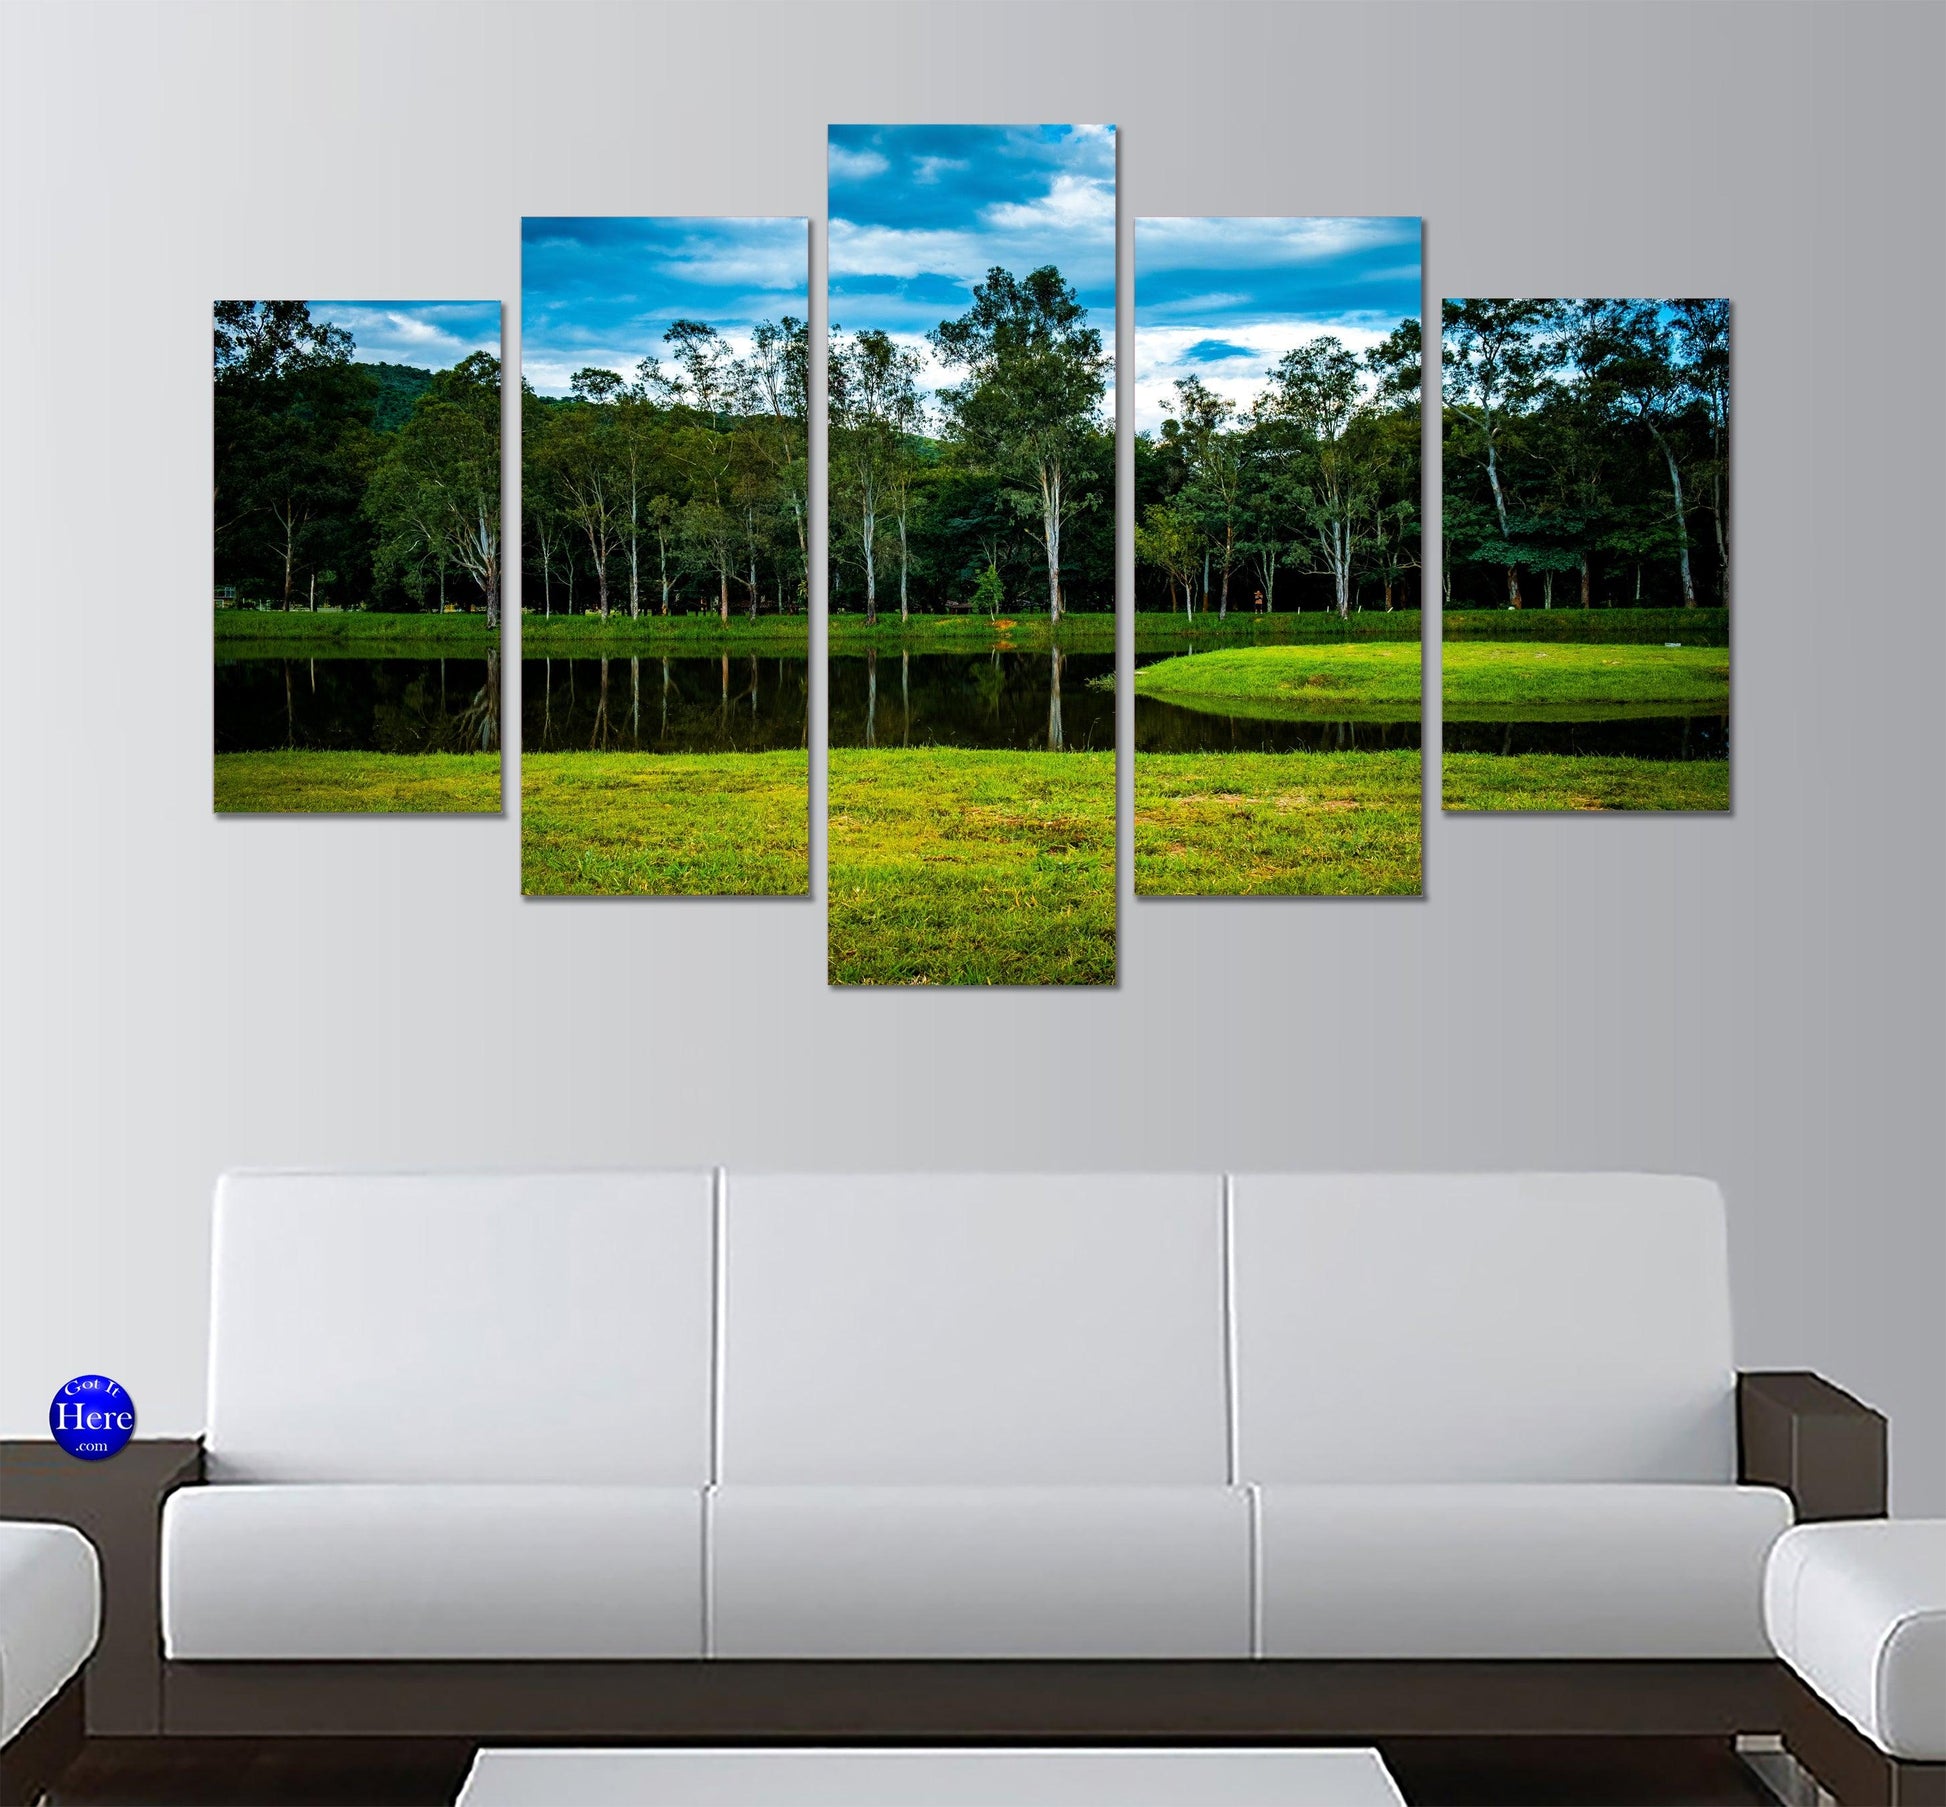 Private Pond By The Woods 5 Panel Canvas Print Wall Art - GotItHere.com